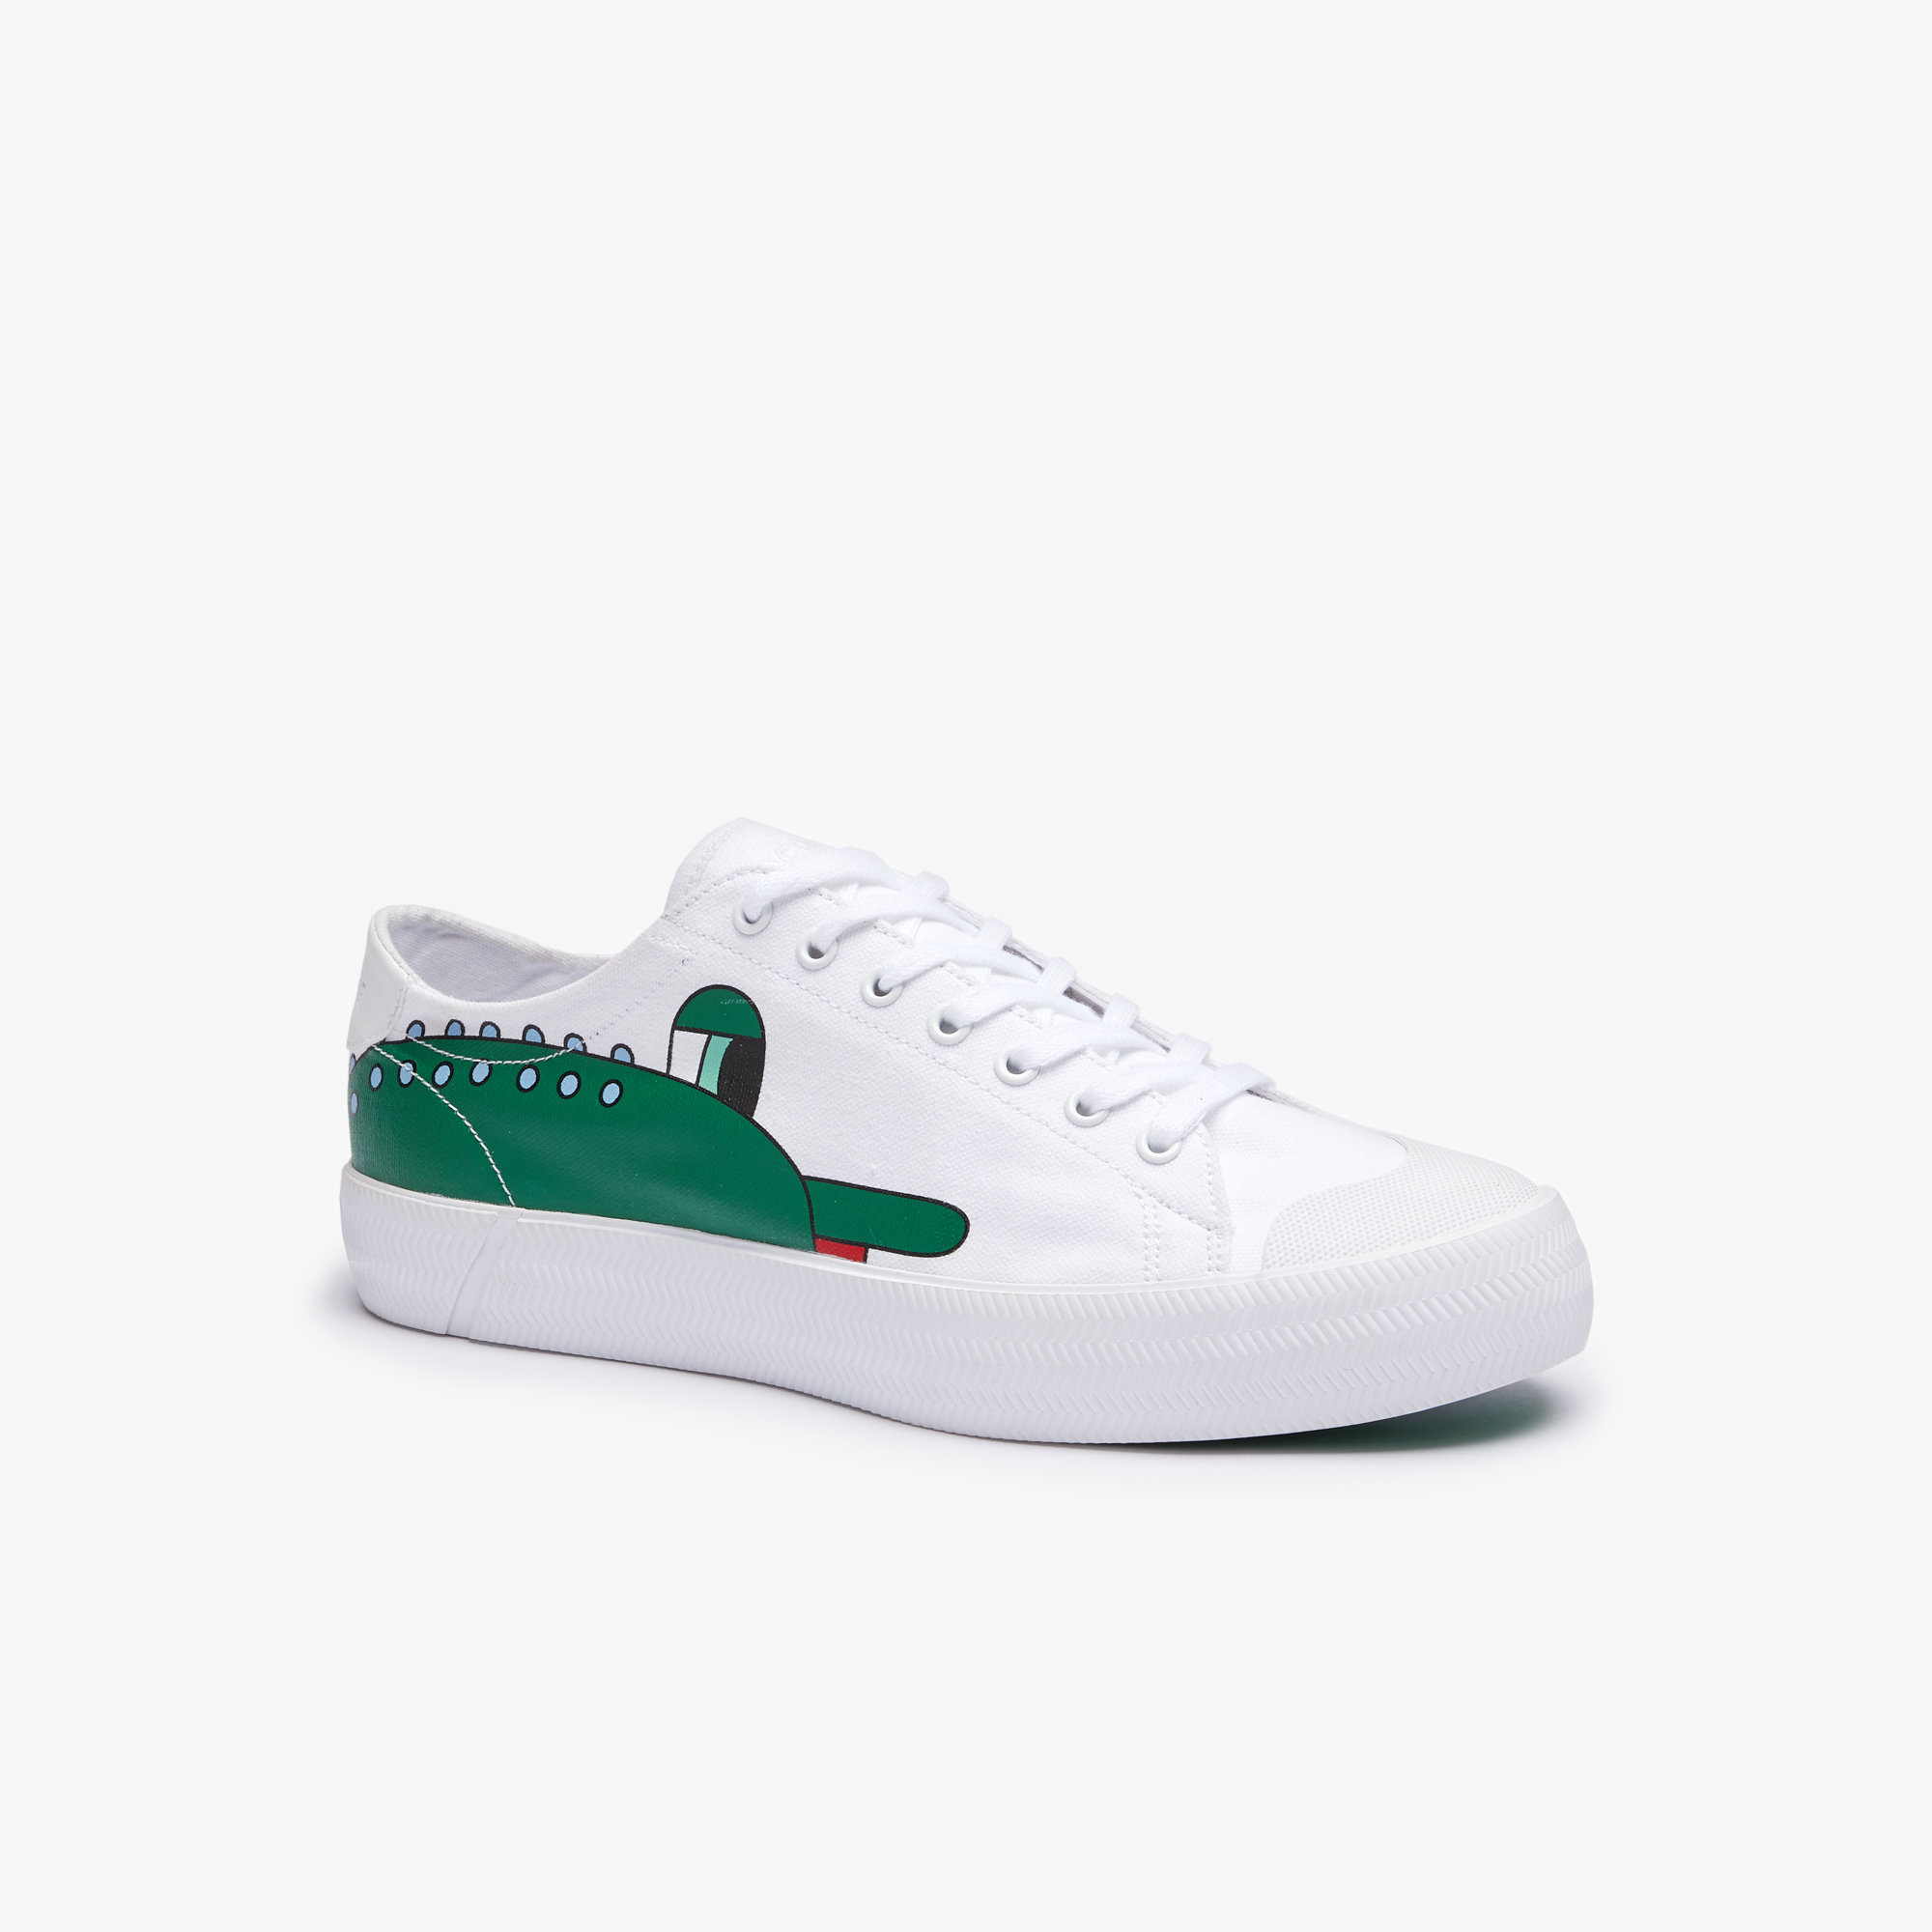 lacoste mesh trainers